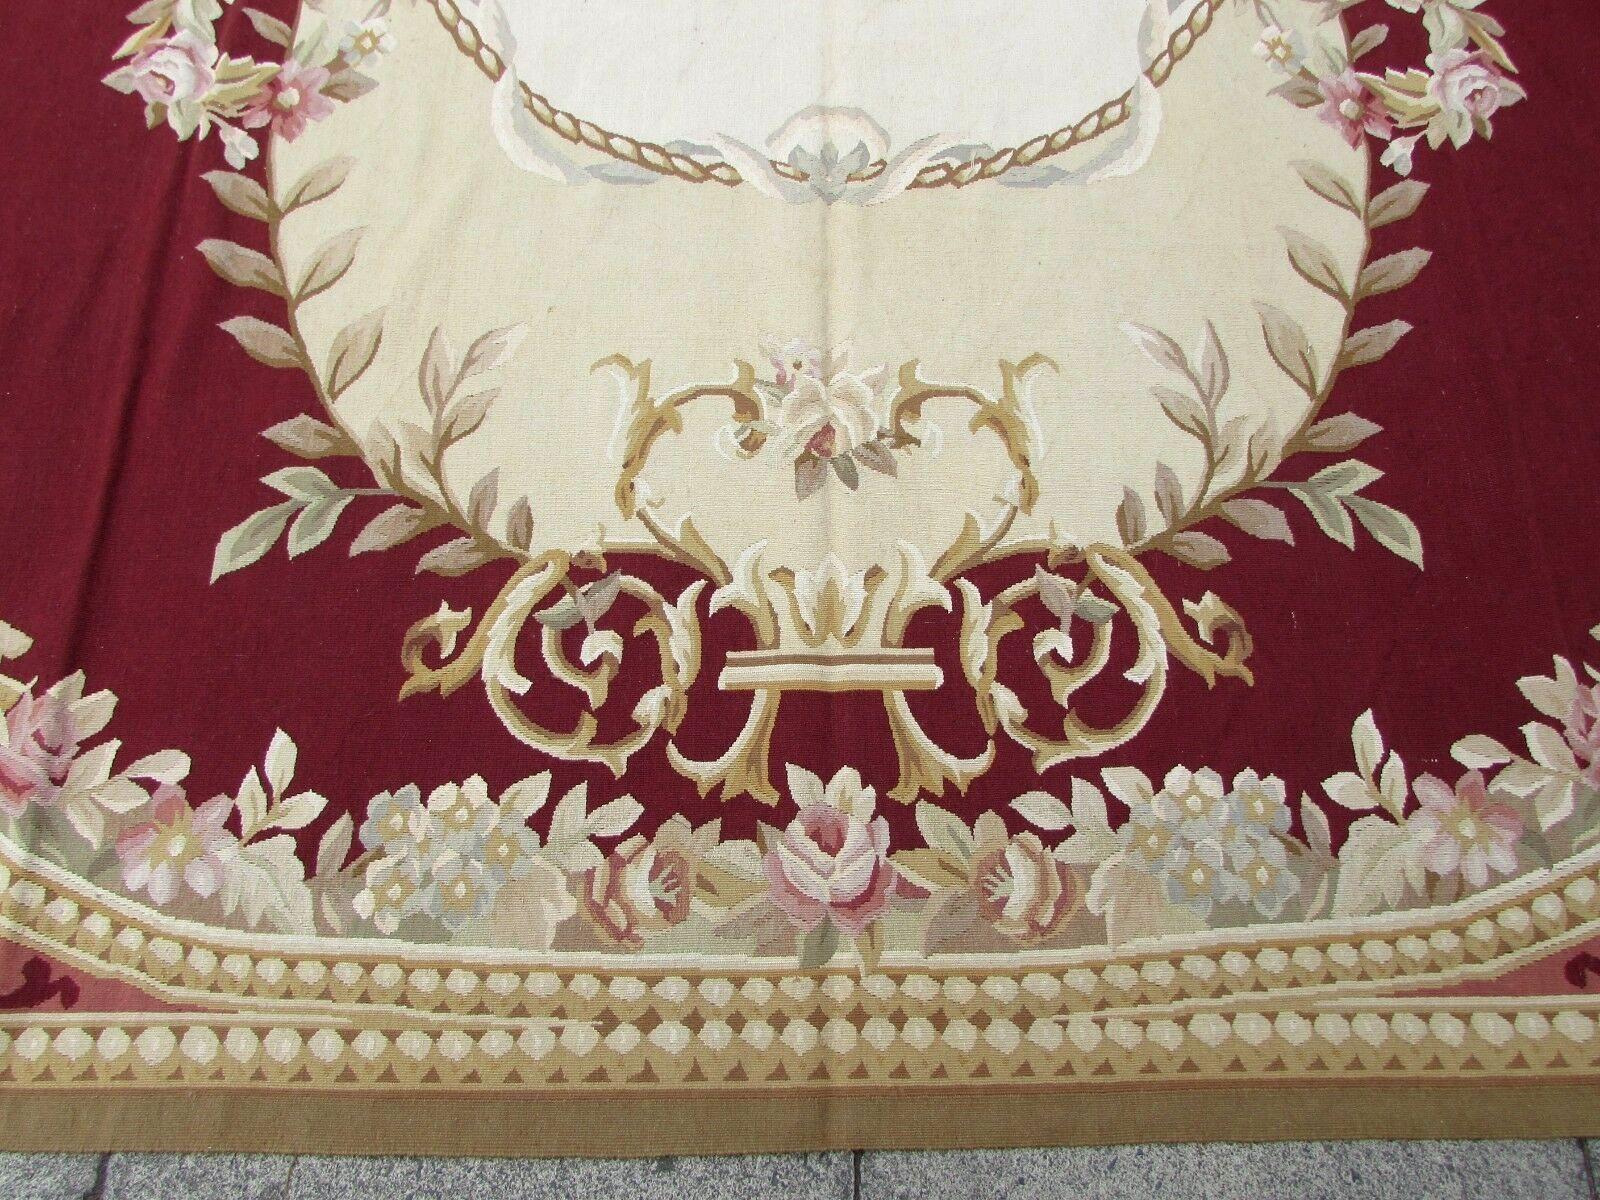 Handmade vintage French Aubusson rug in burgundy and beige wool. This rug has been made in the end of 20th century, it is in original good condition.

- Condition: original good,

- circa 1980s,

- Size: 8.8' x 12.2' (270cm x 373cm),

-